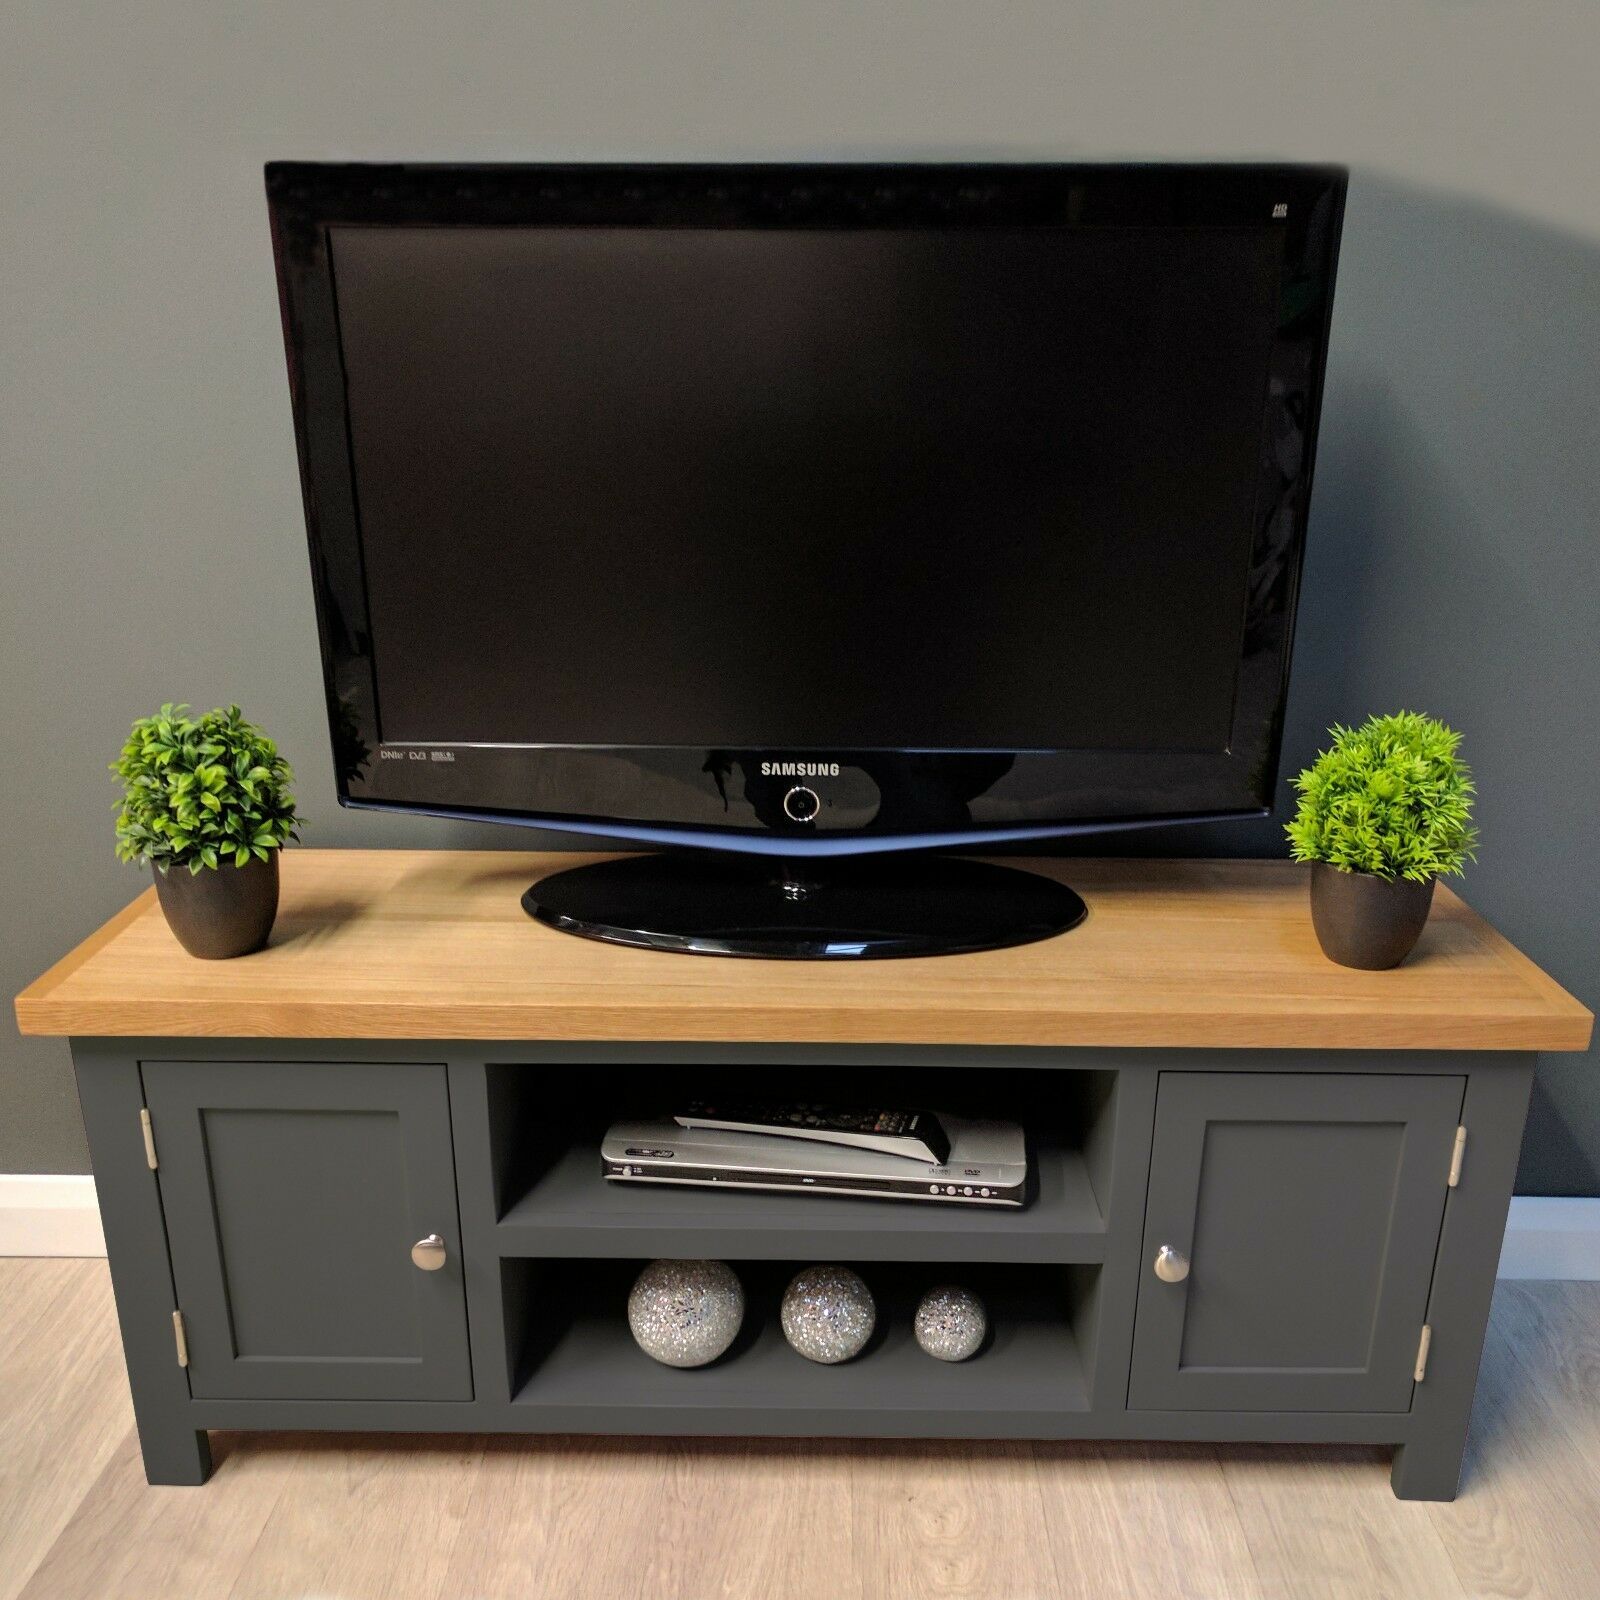 Painted Oak Tv Unit Large / Solid Wood / Dark Grey / Tv Intended For Carbon Tv Unit Stands (View 8 of 15)